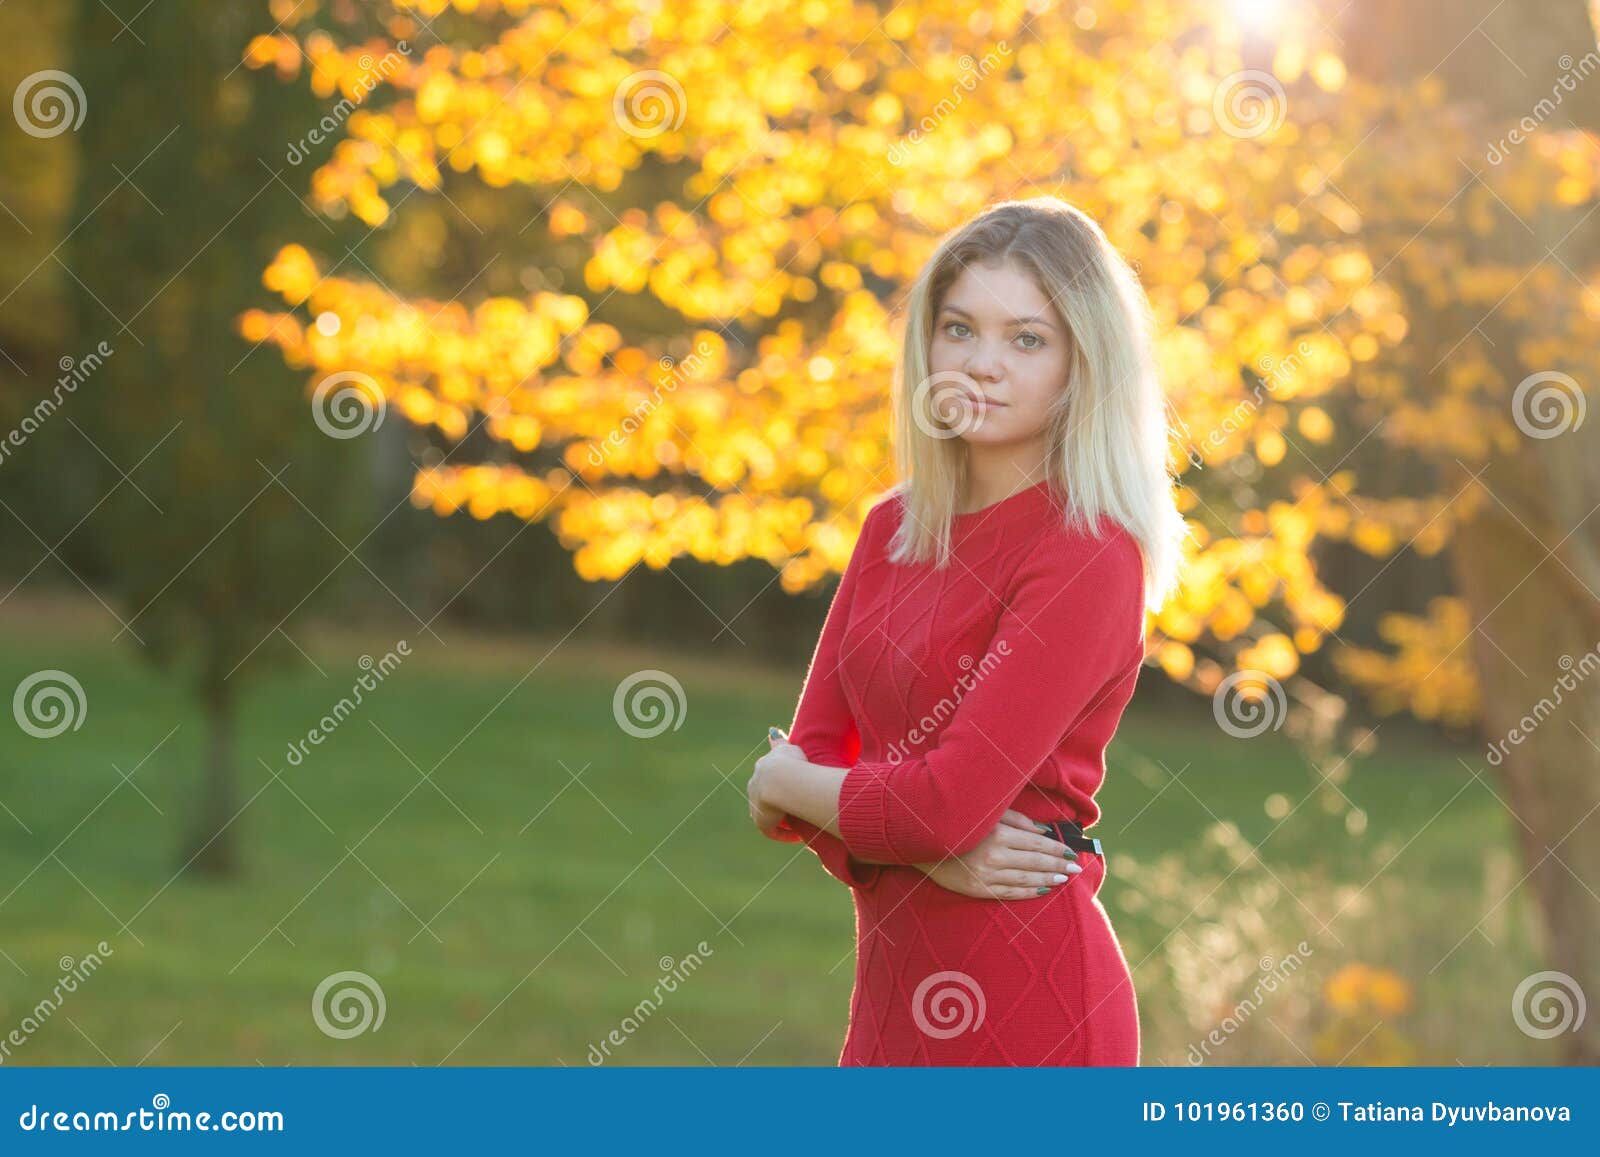 Beautiful Woman with Autumn Leaves on Fall Nature Background Stock ...